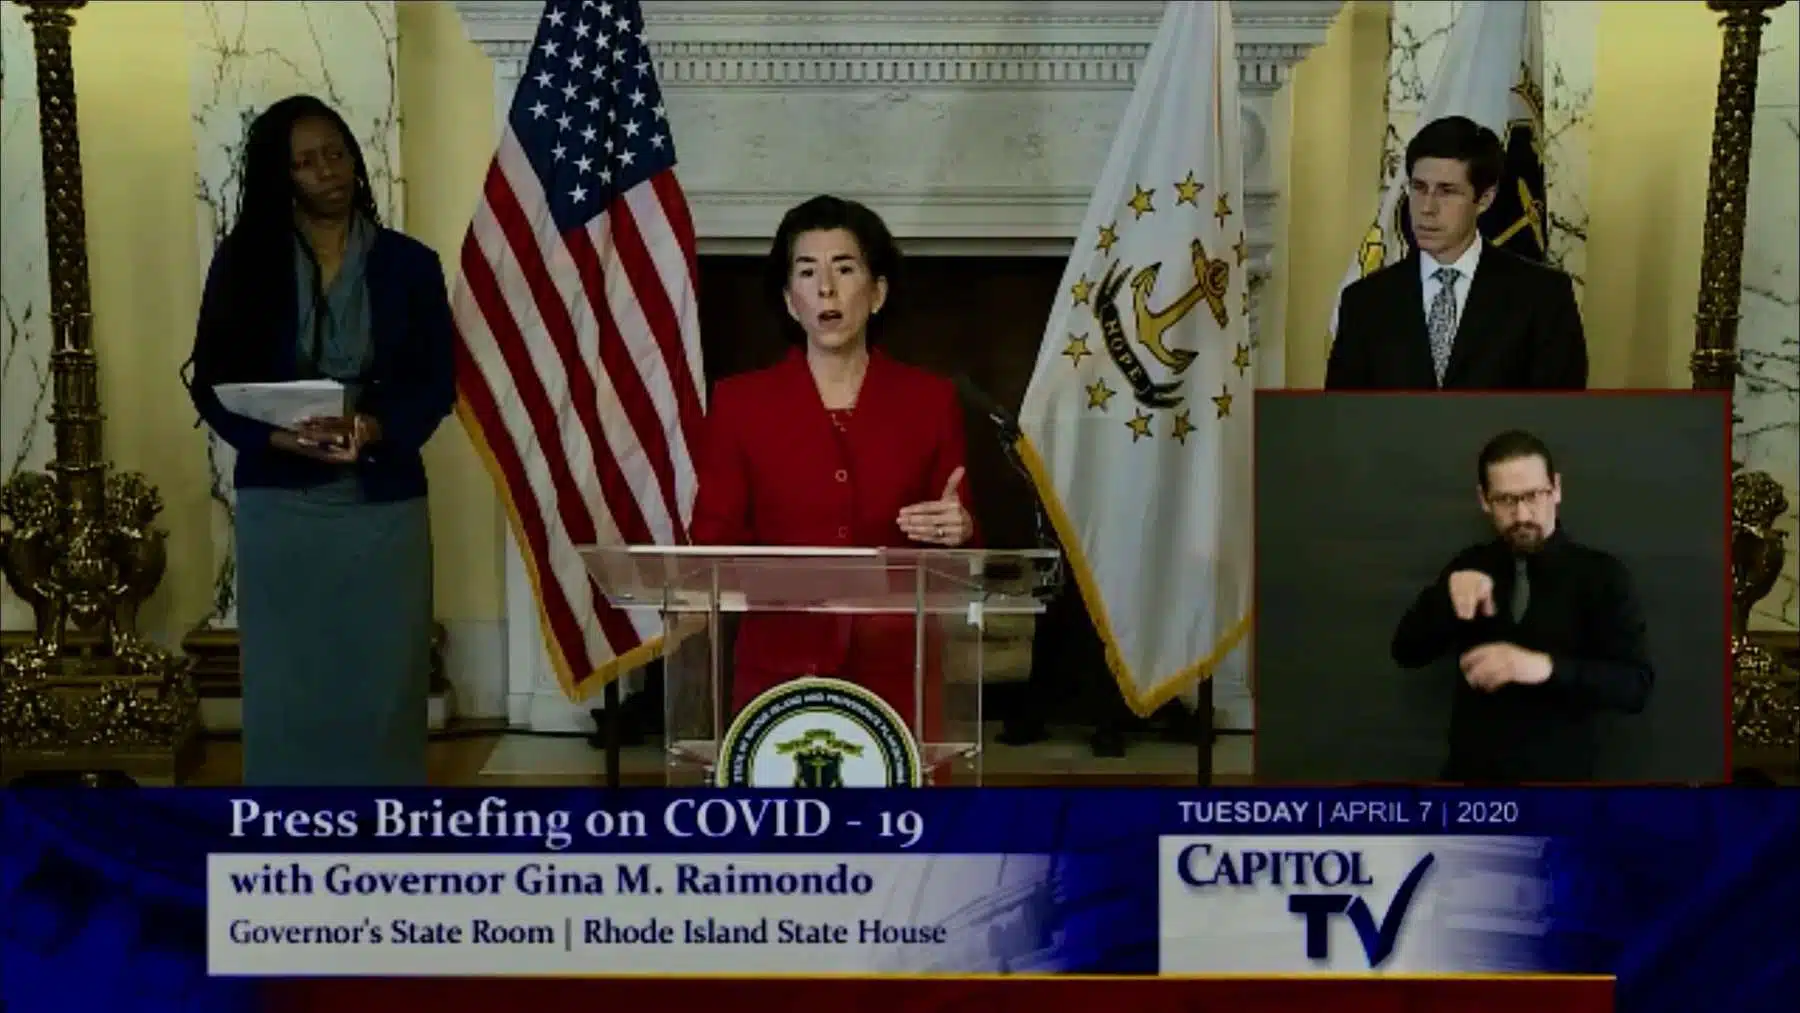 Governor Raimondo encourages undocumented residents to seek testing and healthcare during pandemic